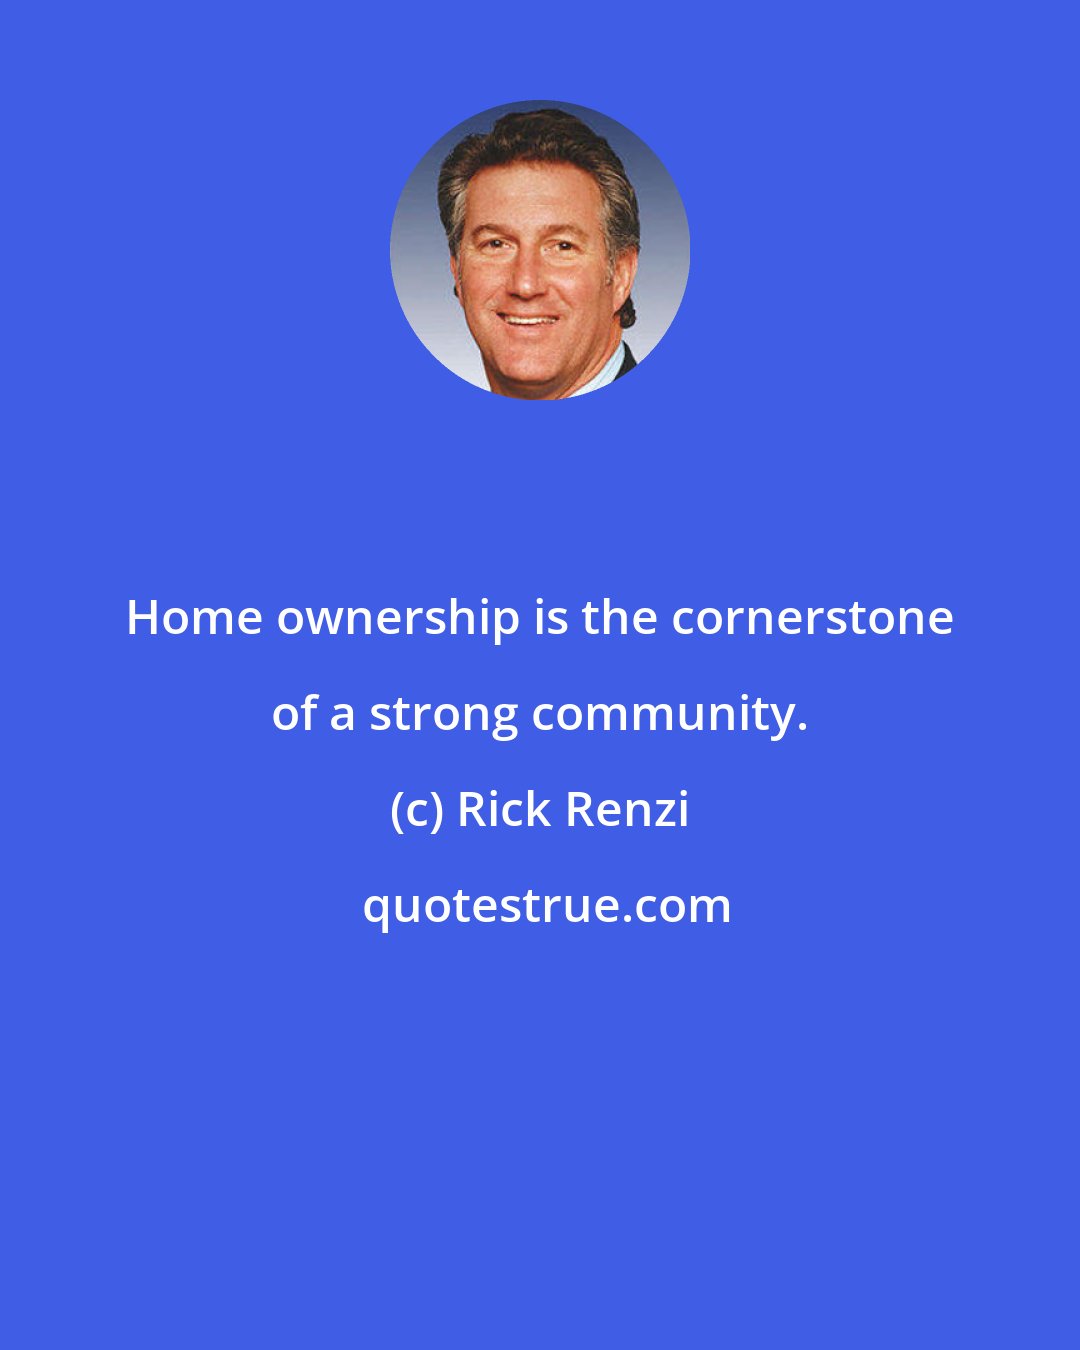 Rick Renzi: Home ownership is the cornerstone of a strong community.